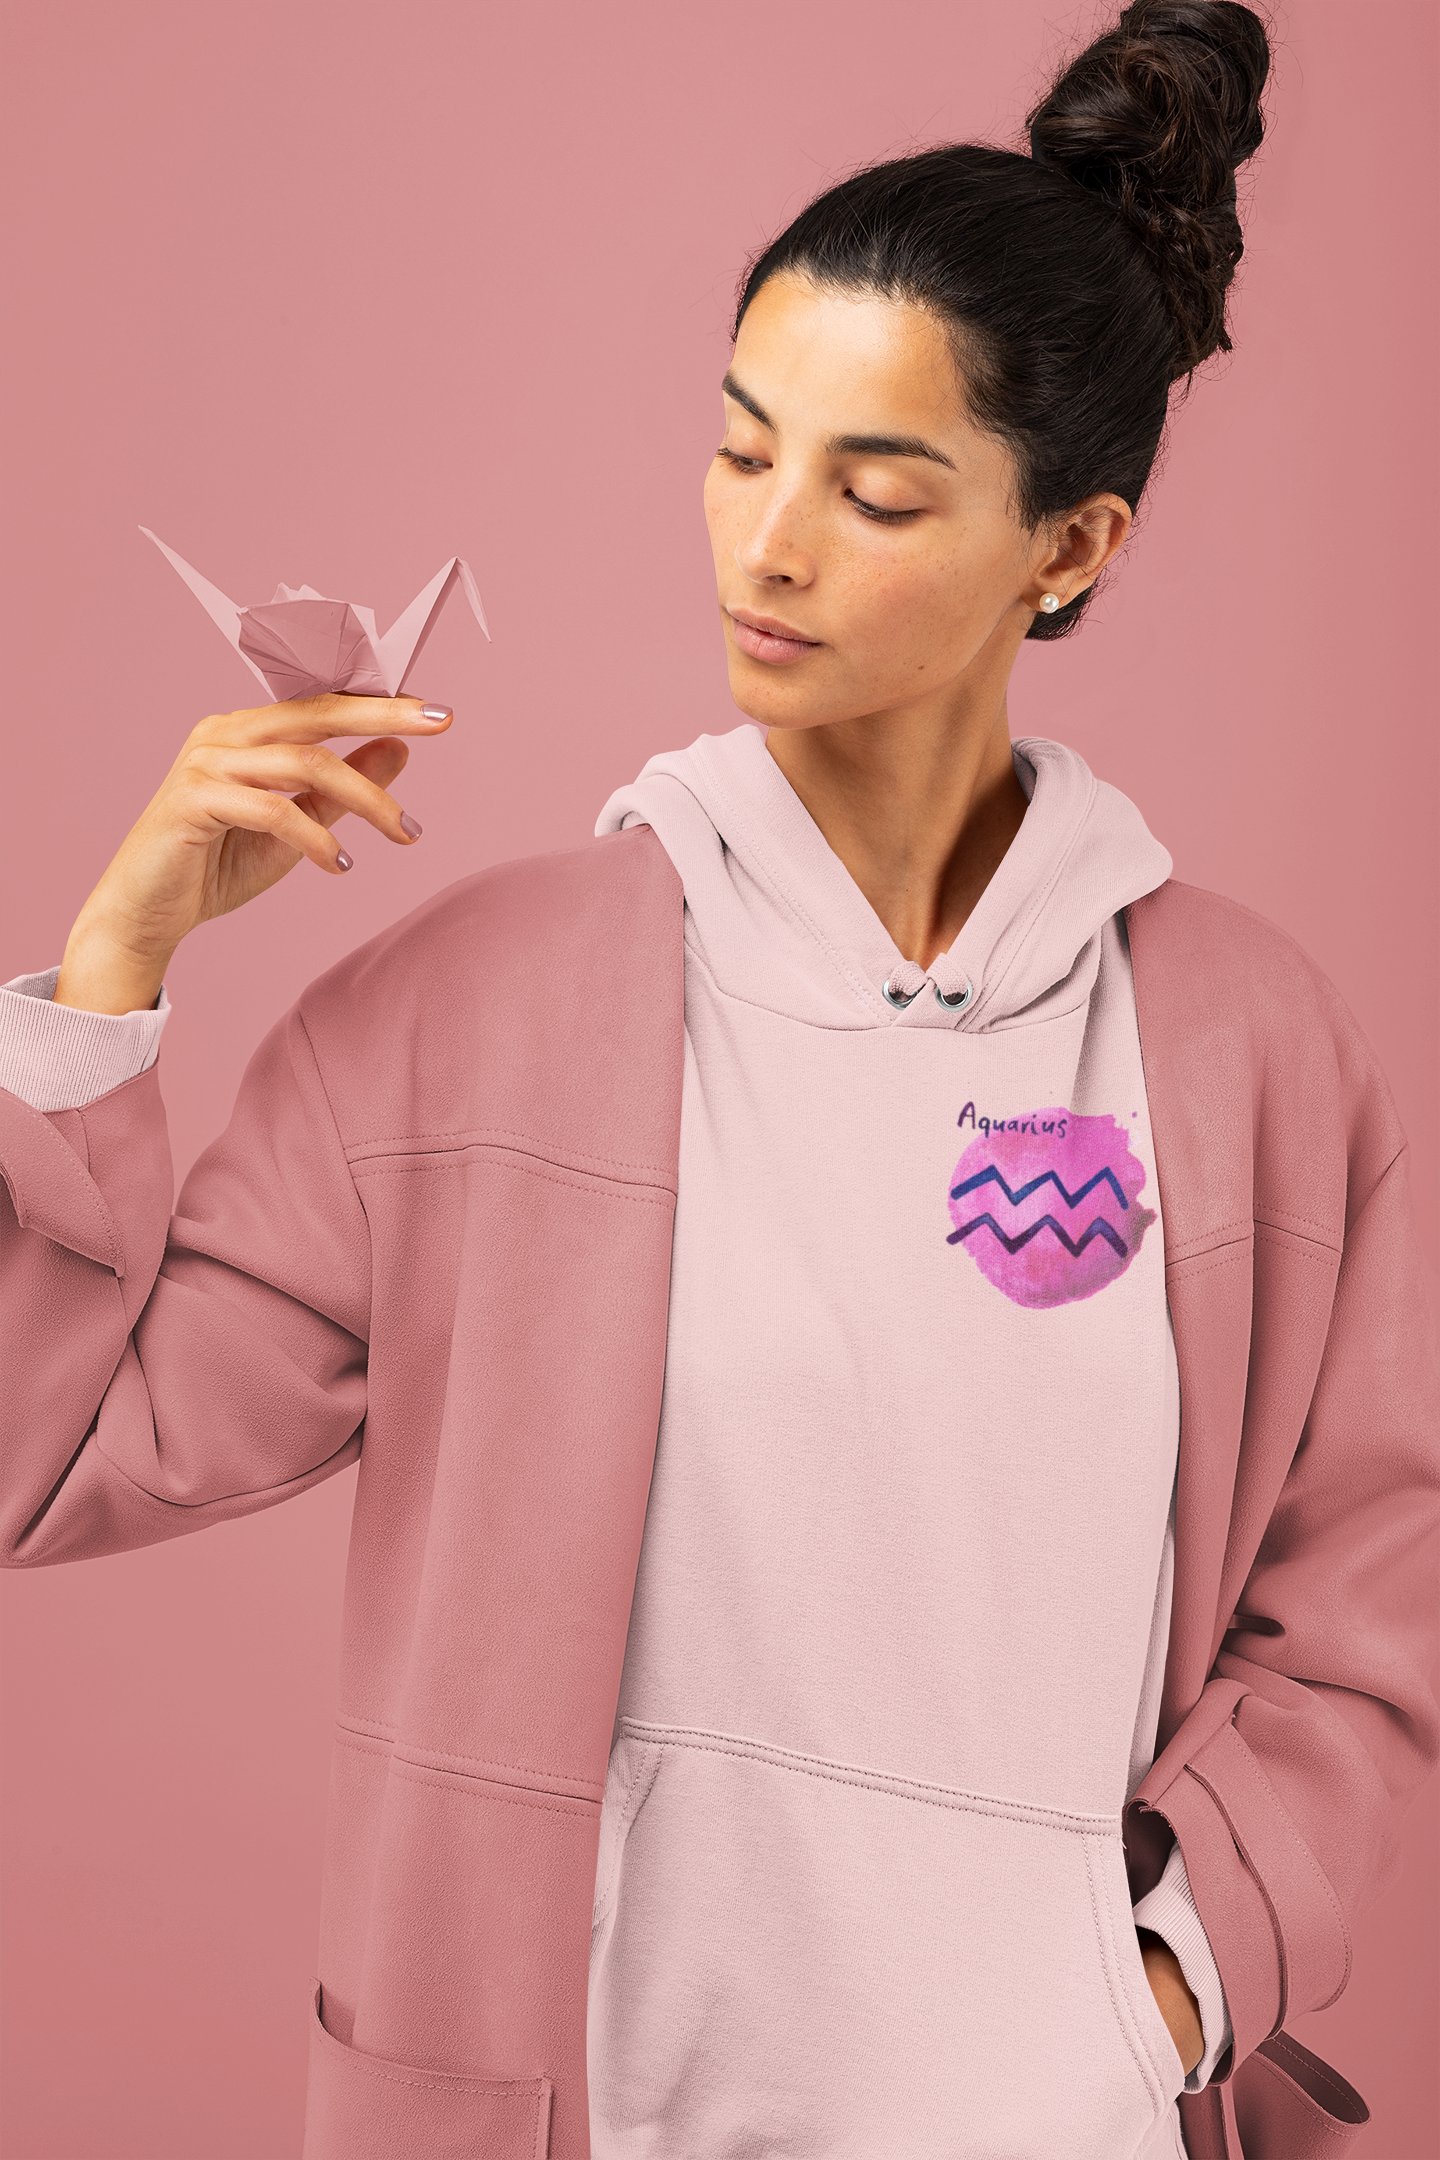 hoodie mockup of a woman with an origami figure 32729 390